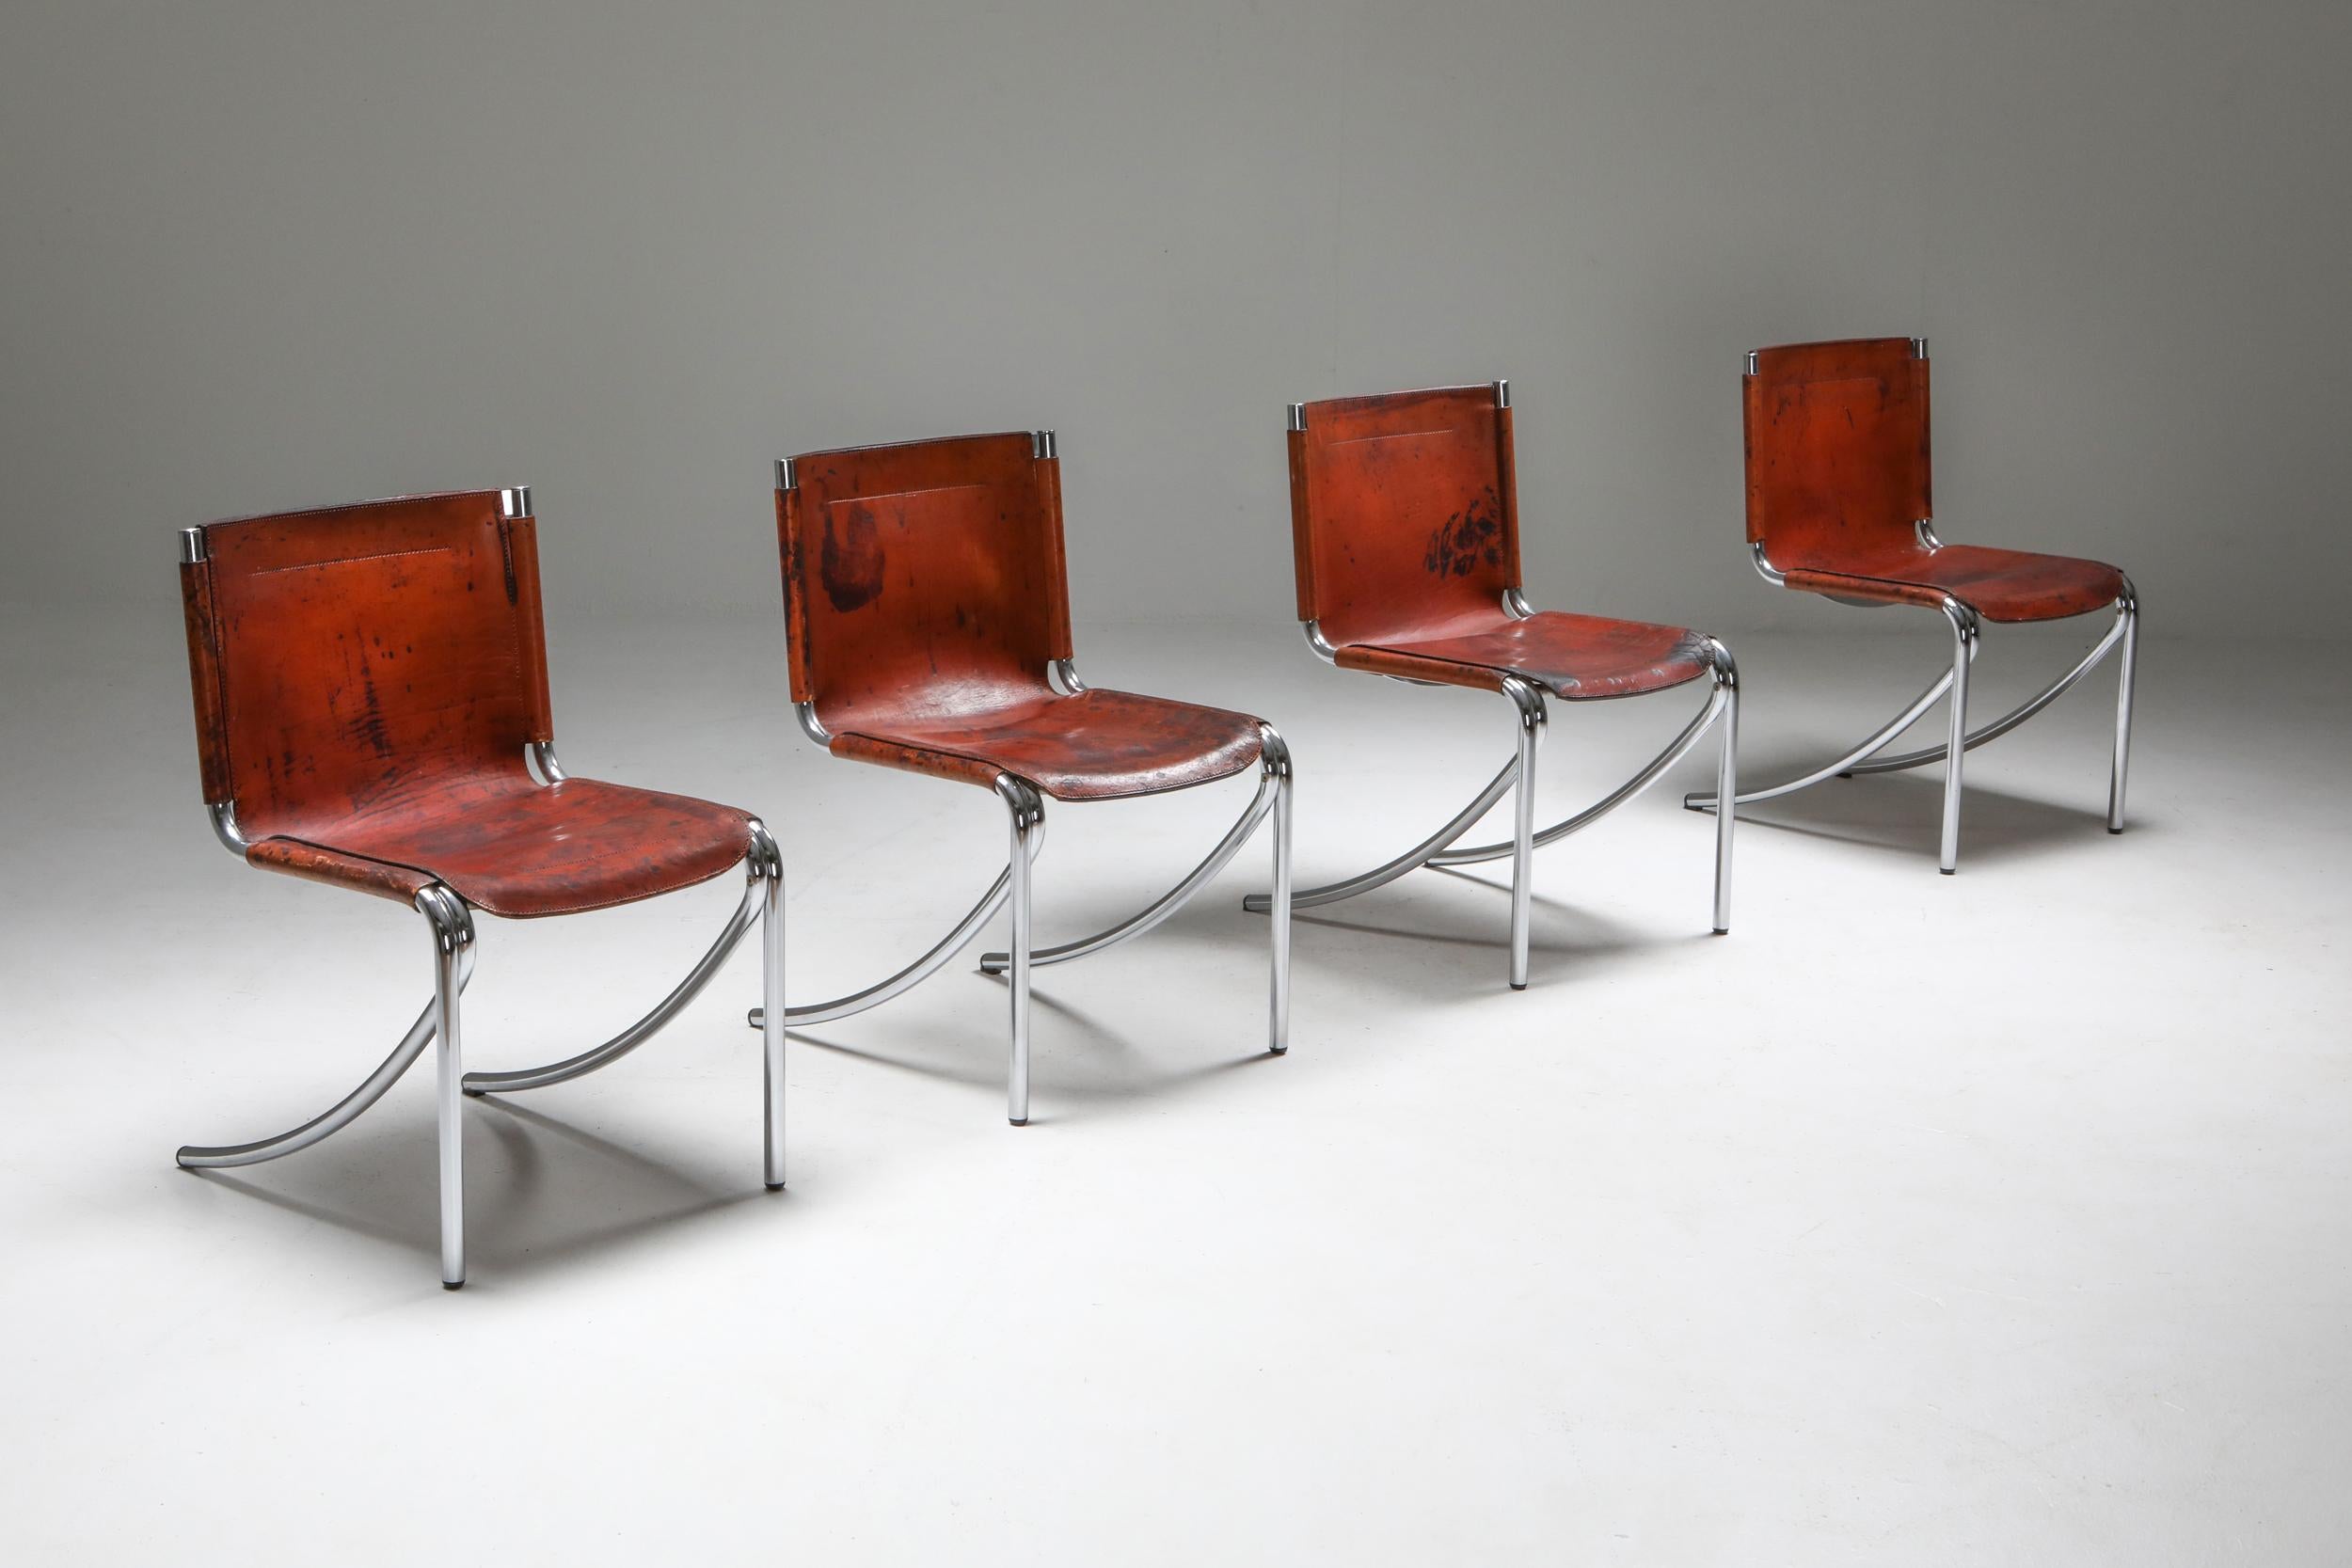 Acerbis, model 'Jot', by Giotto Stoppino, Italy, 1970s

Stunning patina on the leather adds tons of character on these oxblood leather chairs.
The chrome frame is also still in really good condition.
 